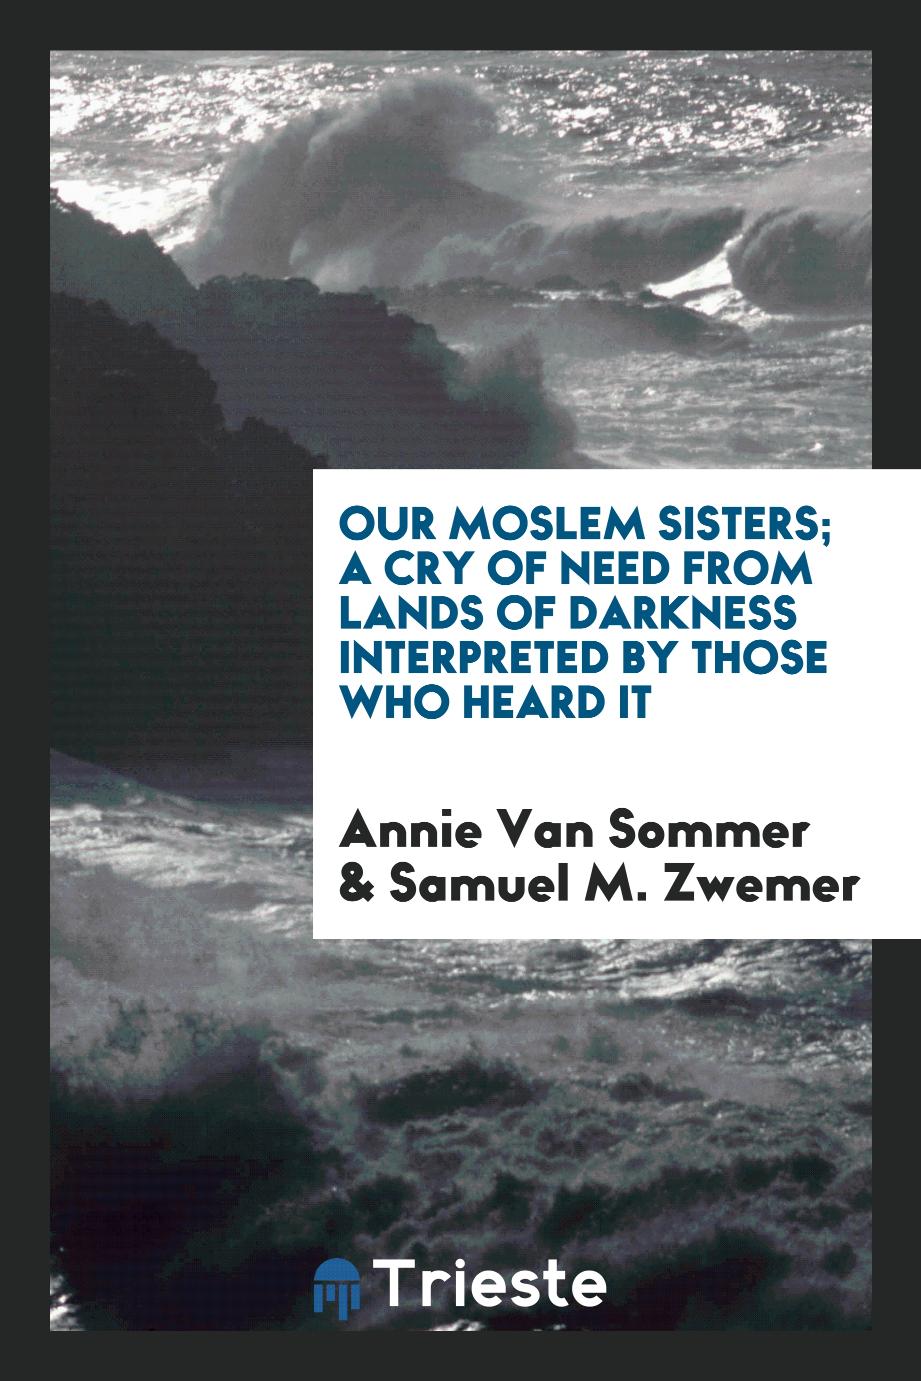 Our Moslem sisters; A Cry of Need from Lands of Darkness Interpreted by Those Who Heard It